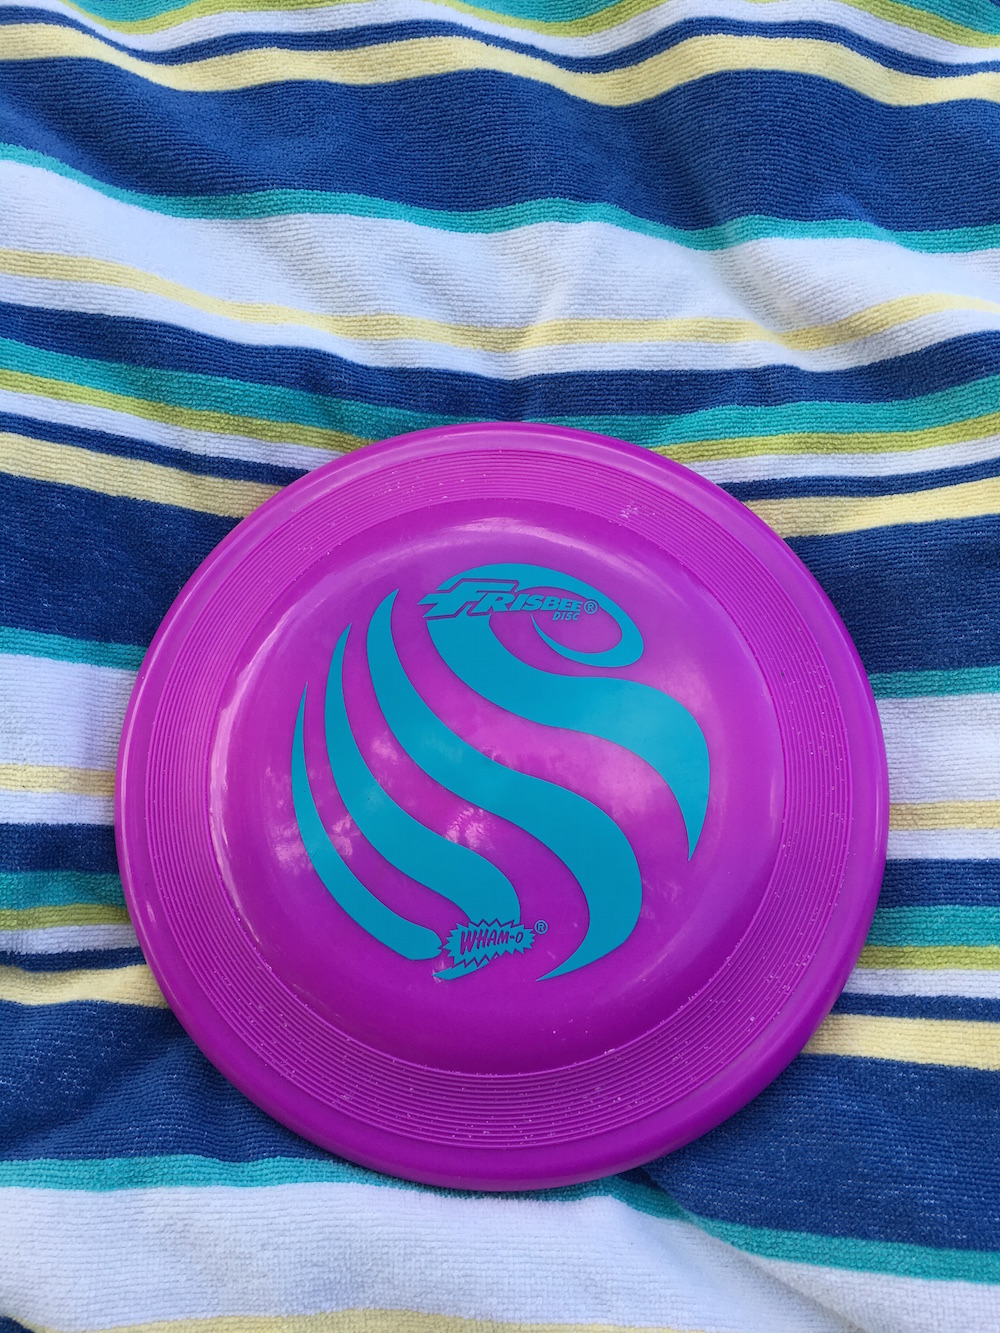 Frisbee on beach towel for day trip to Big Falls